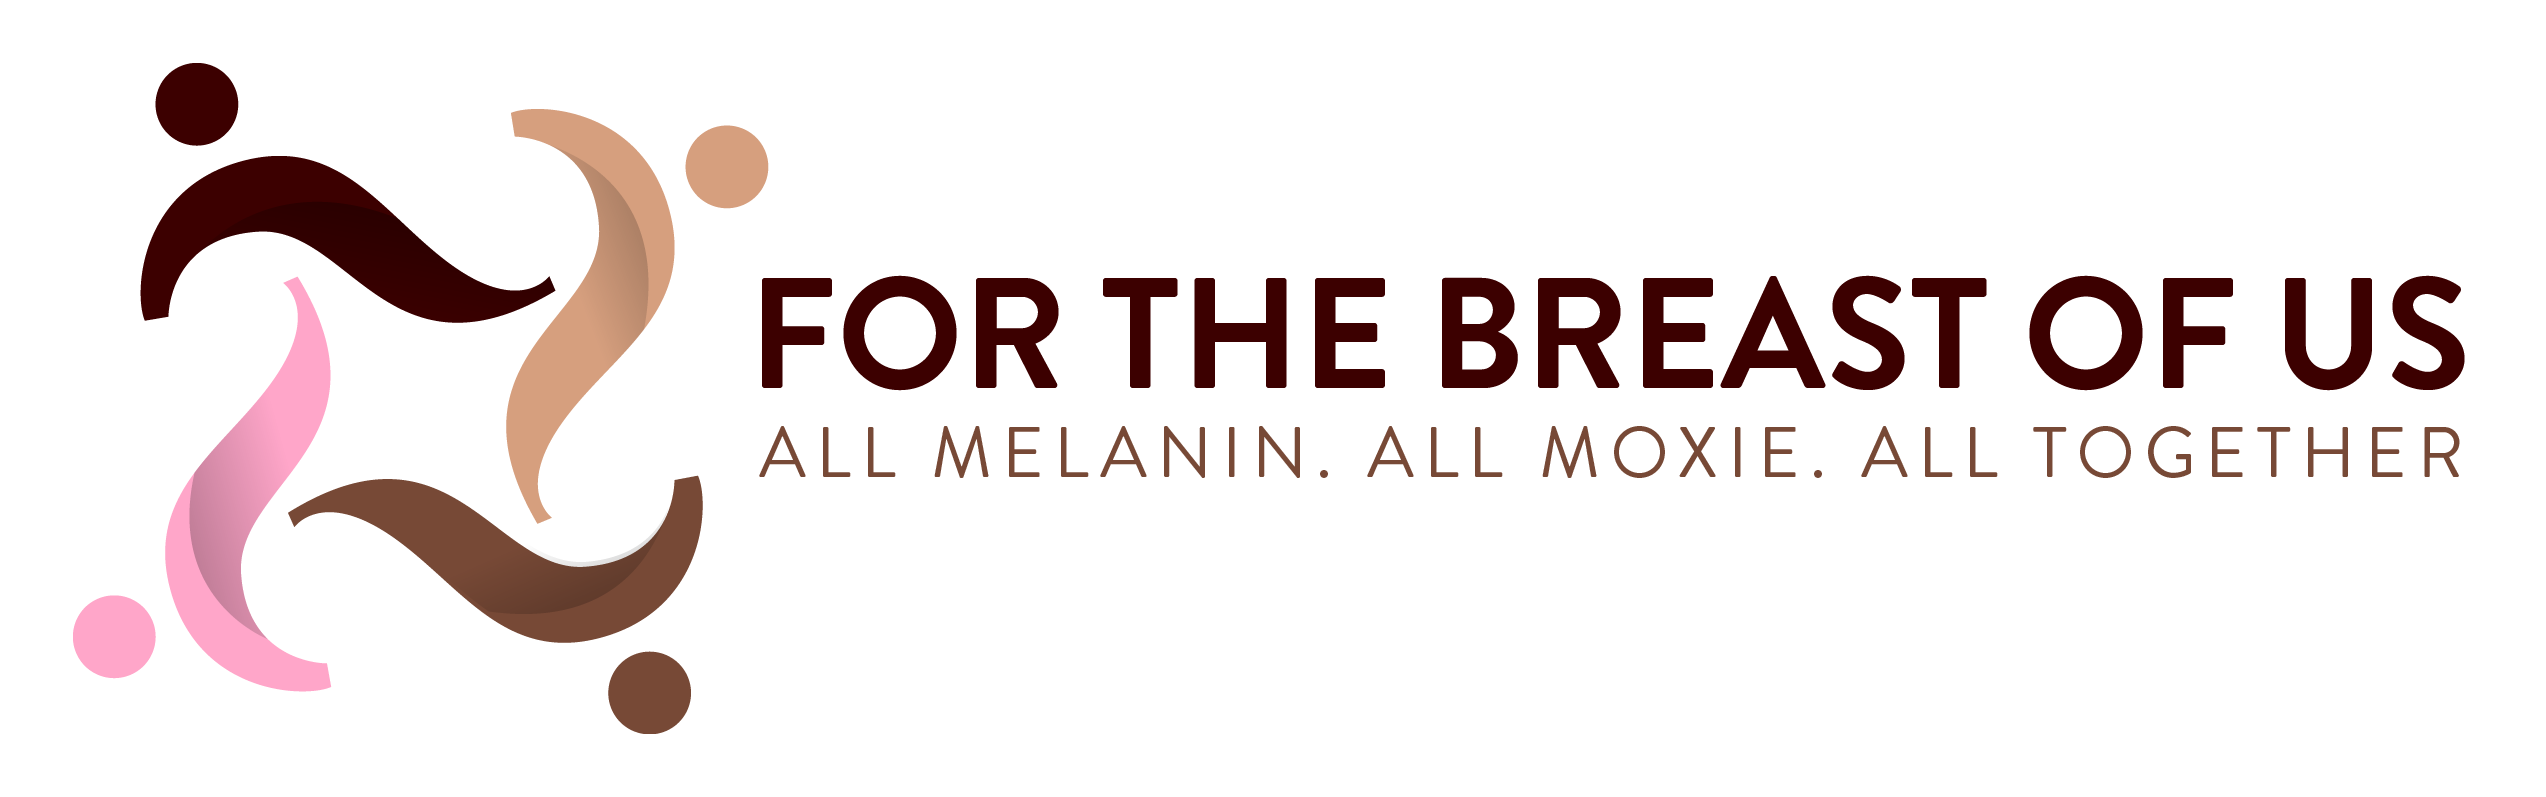 For The Breast Of Us logo. It represents 4 diverse people. The words all melanin, all moxie, all together are written under.